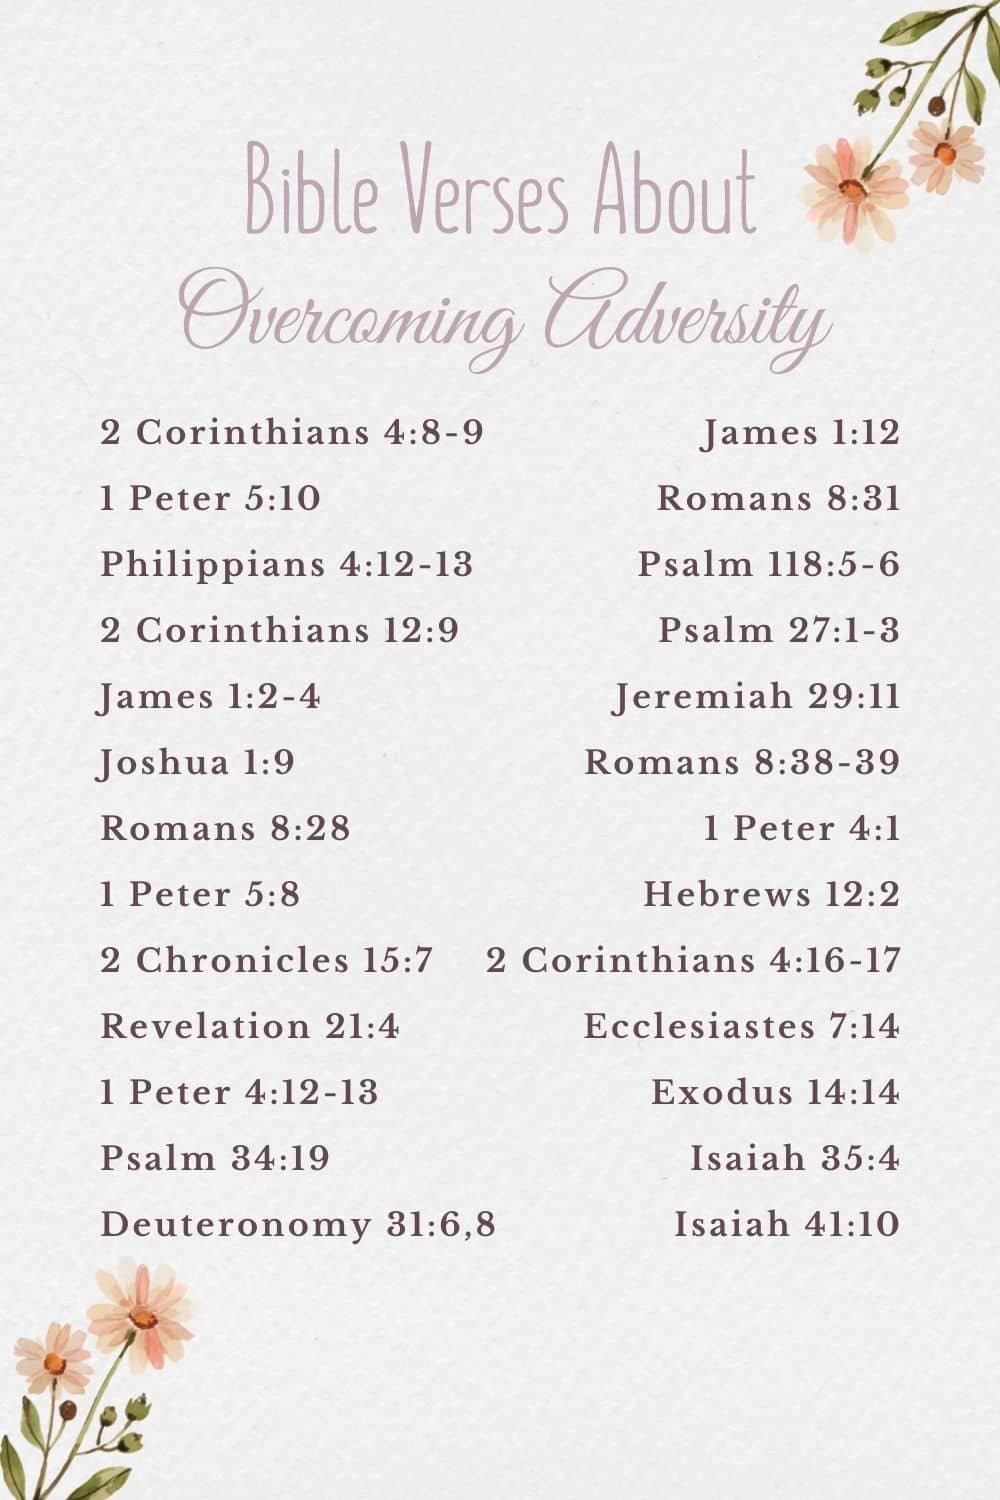 bible verses about overcoming adversity
What does the Bible say about adversity